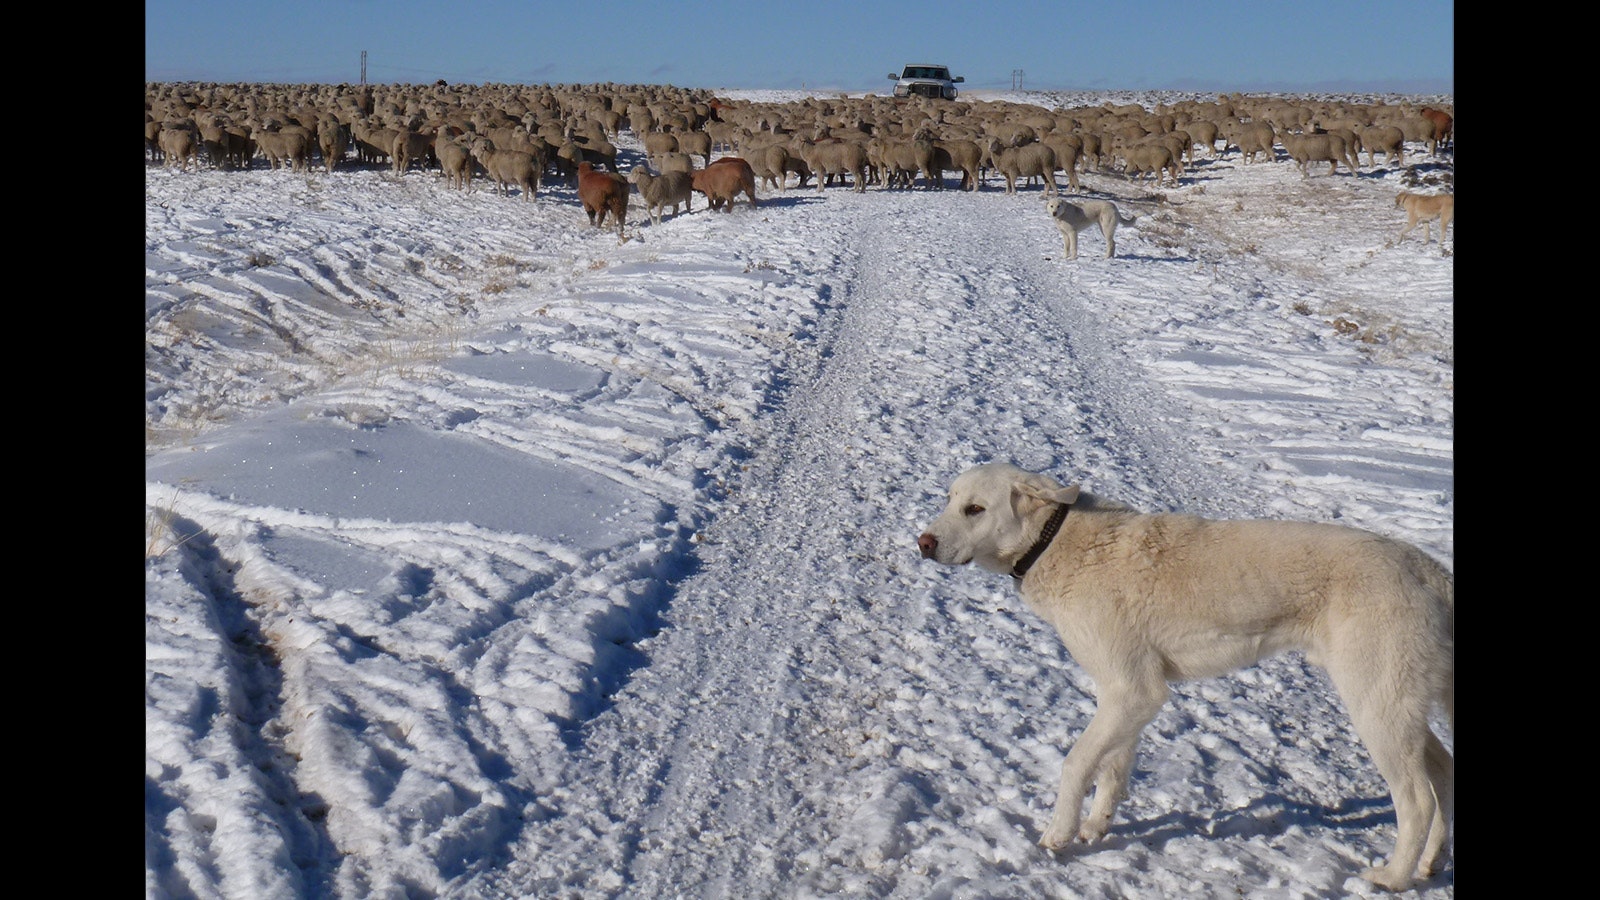 A guard dog watches over a flock of sheep in Wyoming.